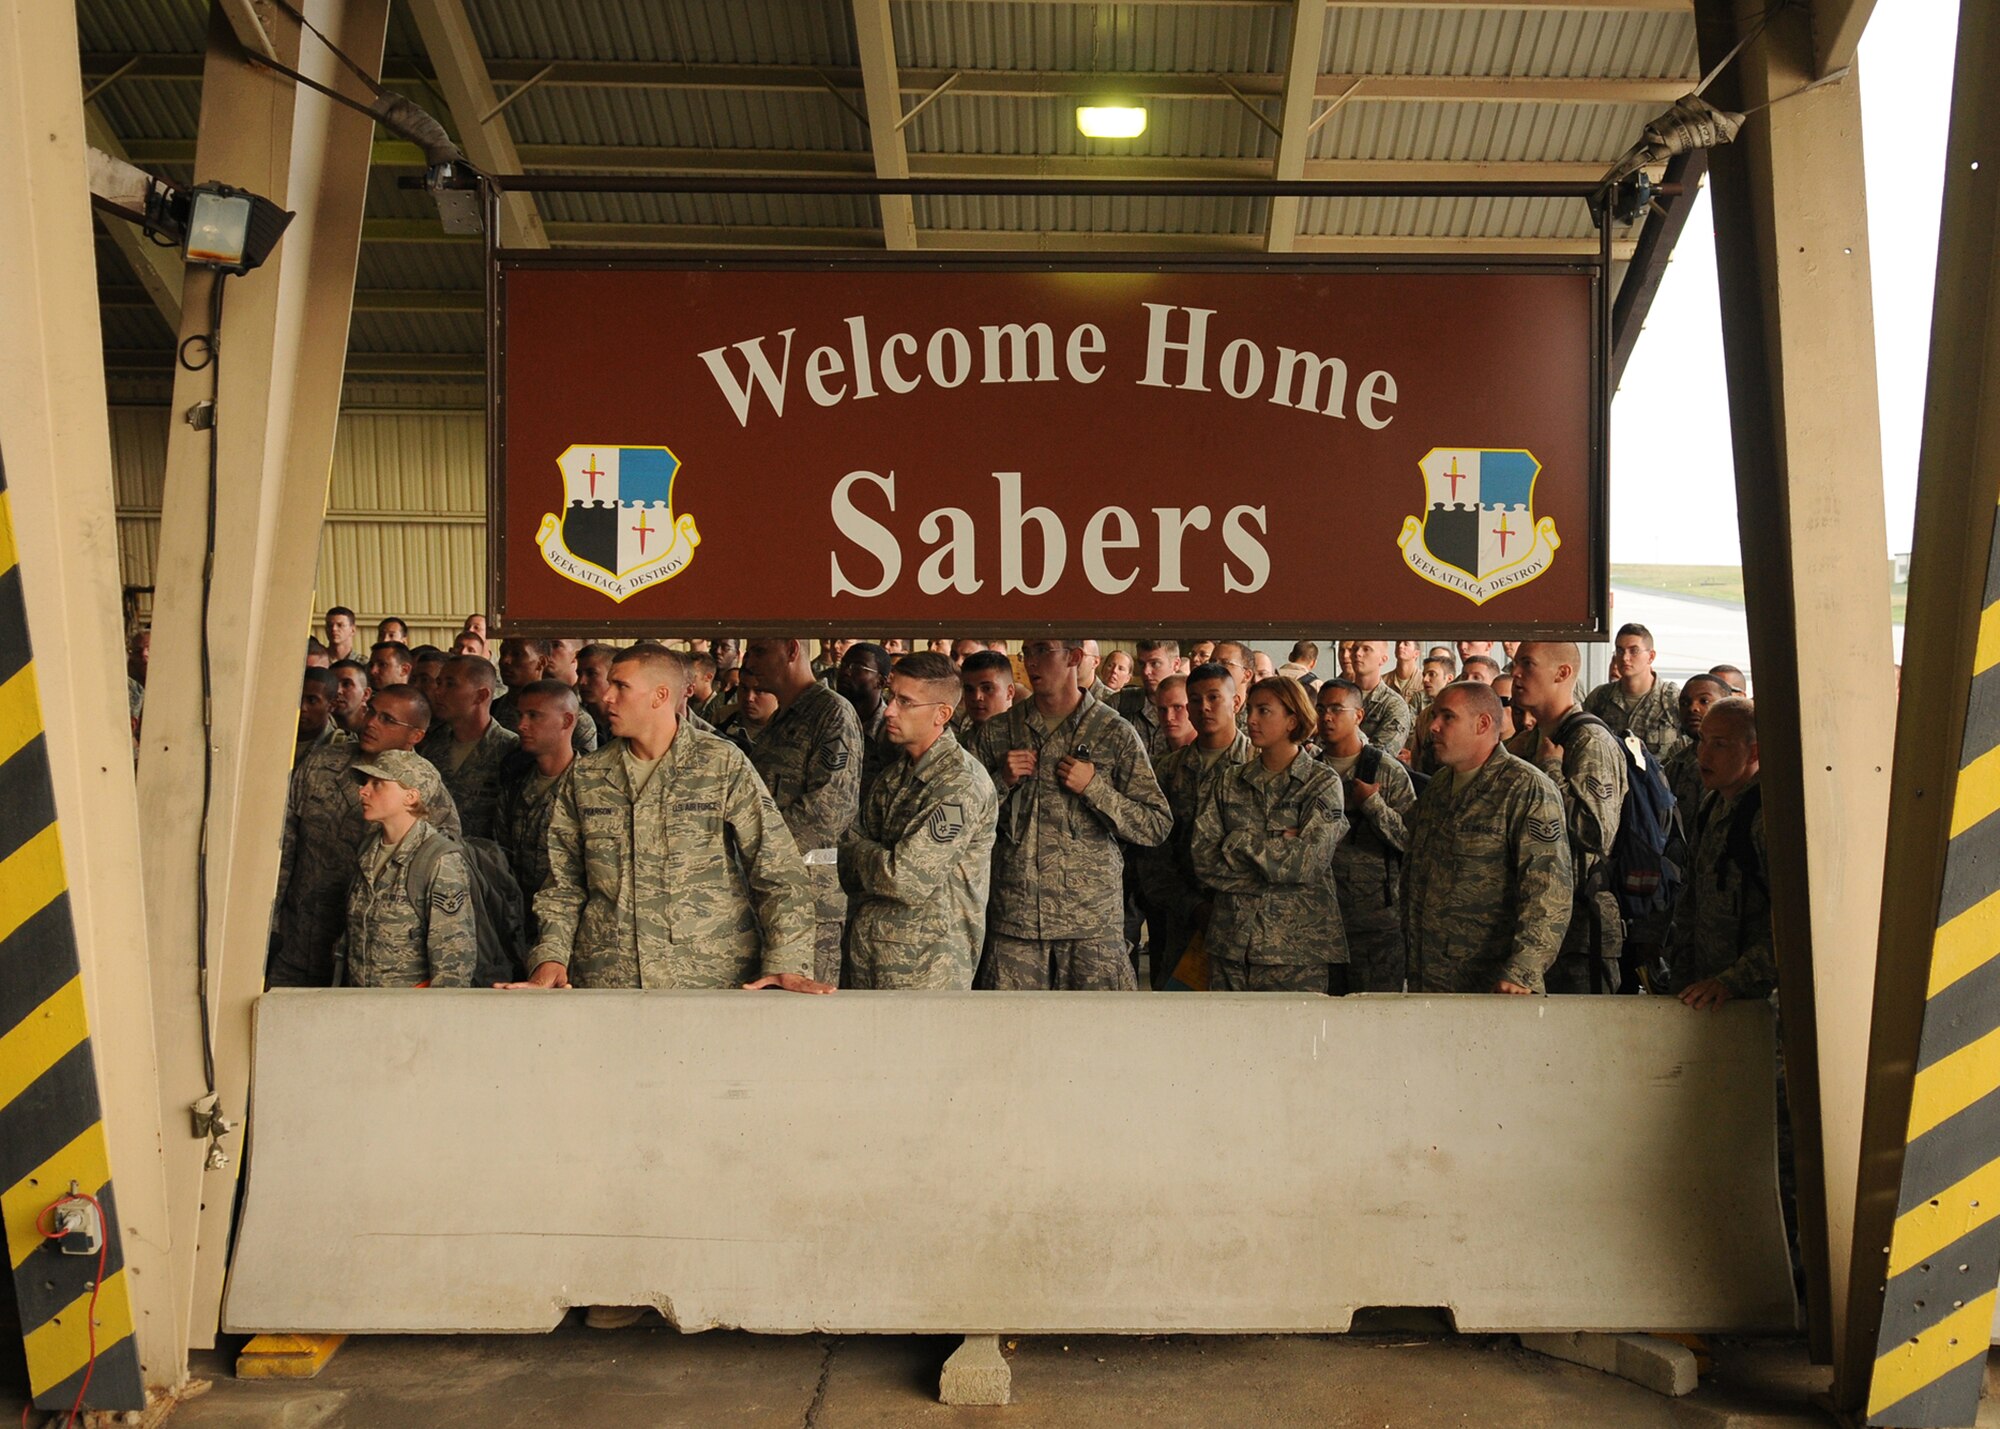 SPANGDAHLEM AIR BASE, Germany - Members of the 52nd Fighter Wing wait to process through customs Sept. 28. Spangdahlem Air Base deployed about 330 Airmen in support of Operation Iraqi Freedom. (U.S. Air Force photo/Airman 1st Class Nathanael Callon)